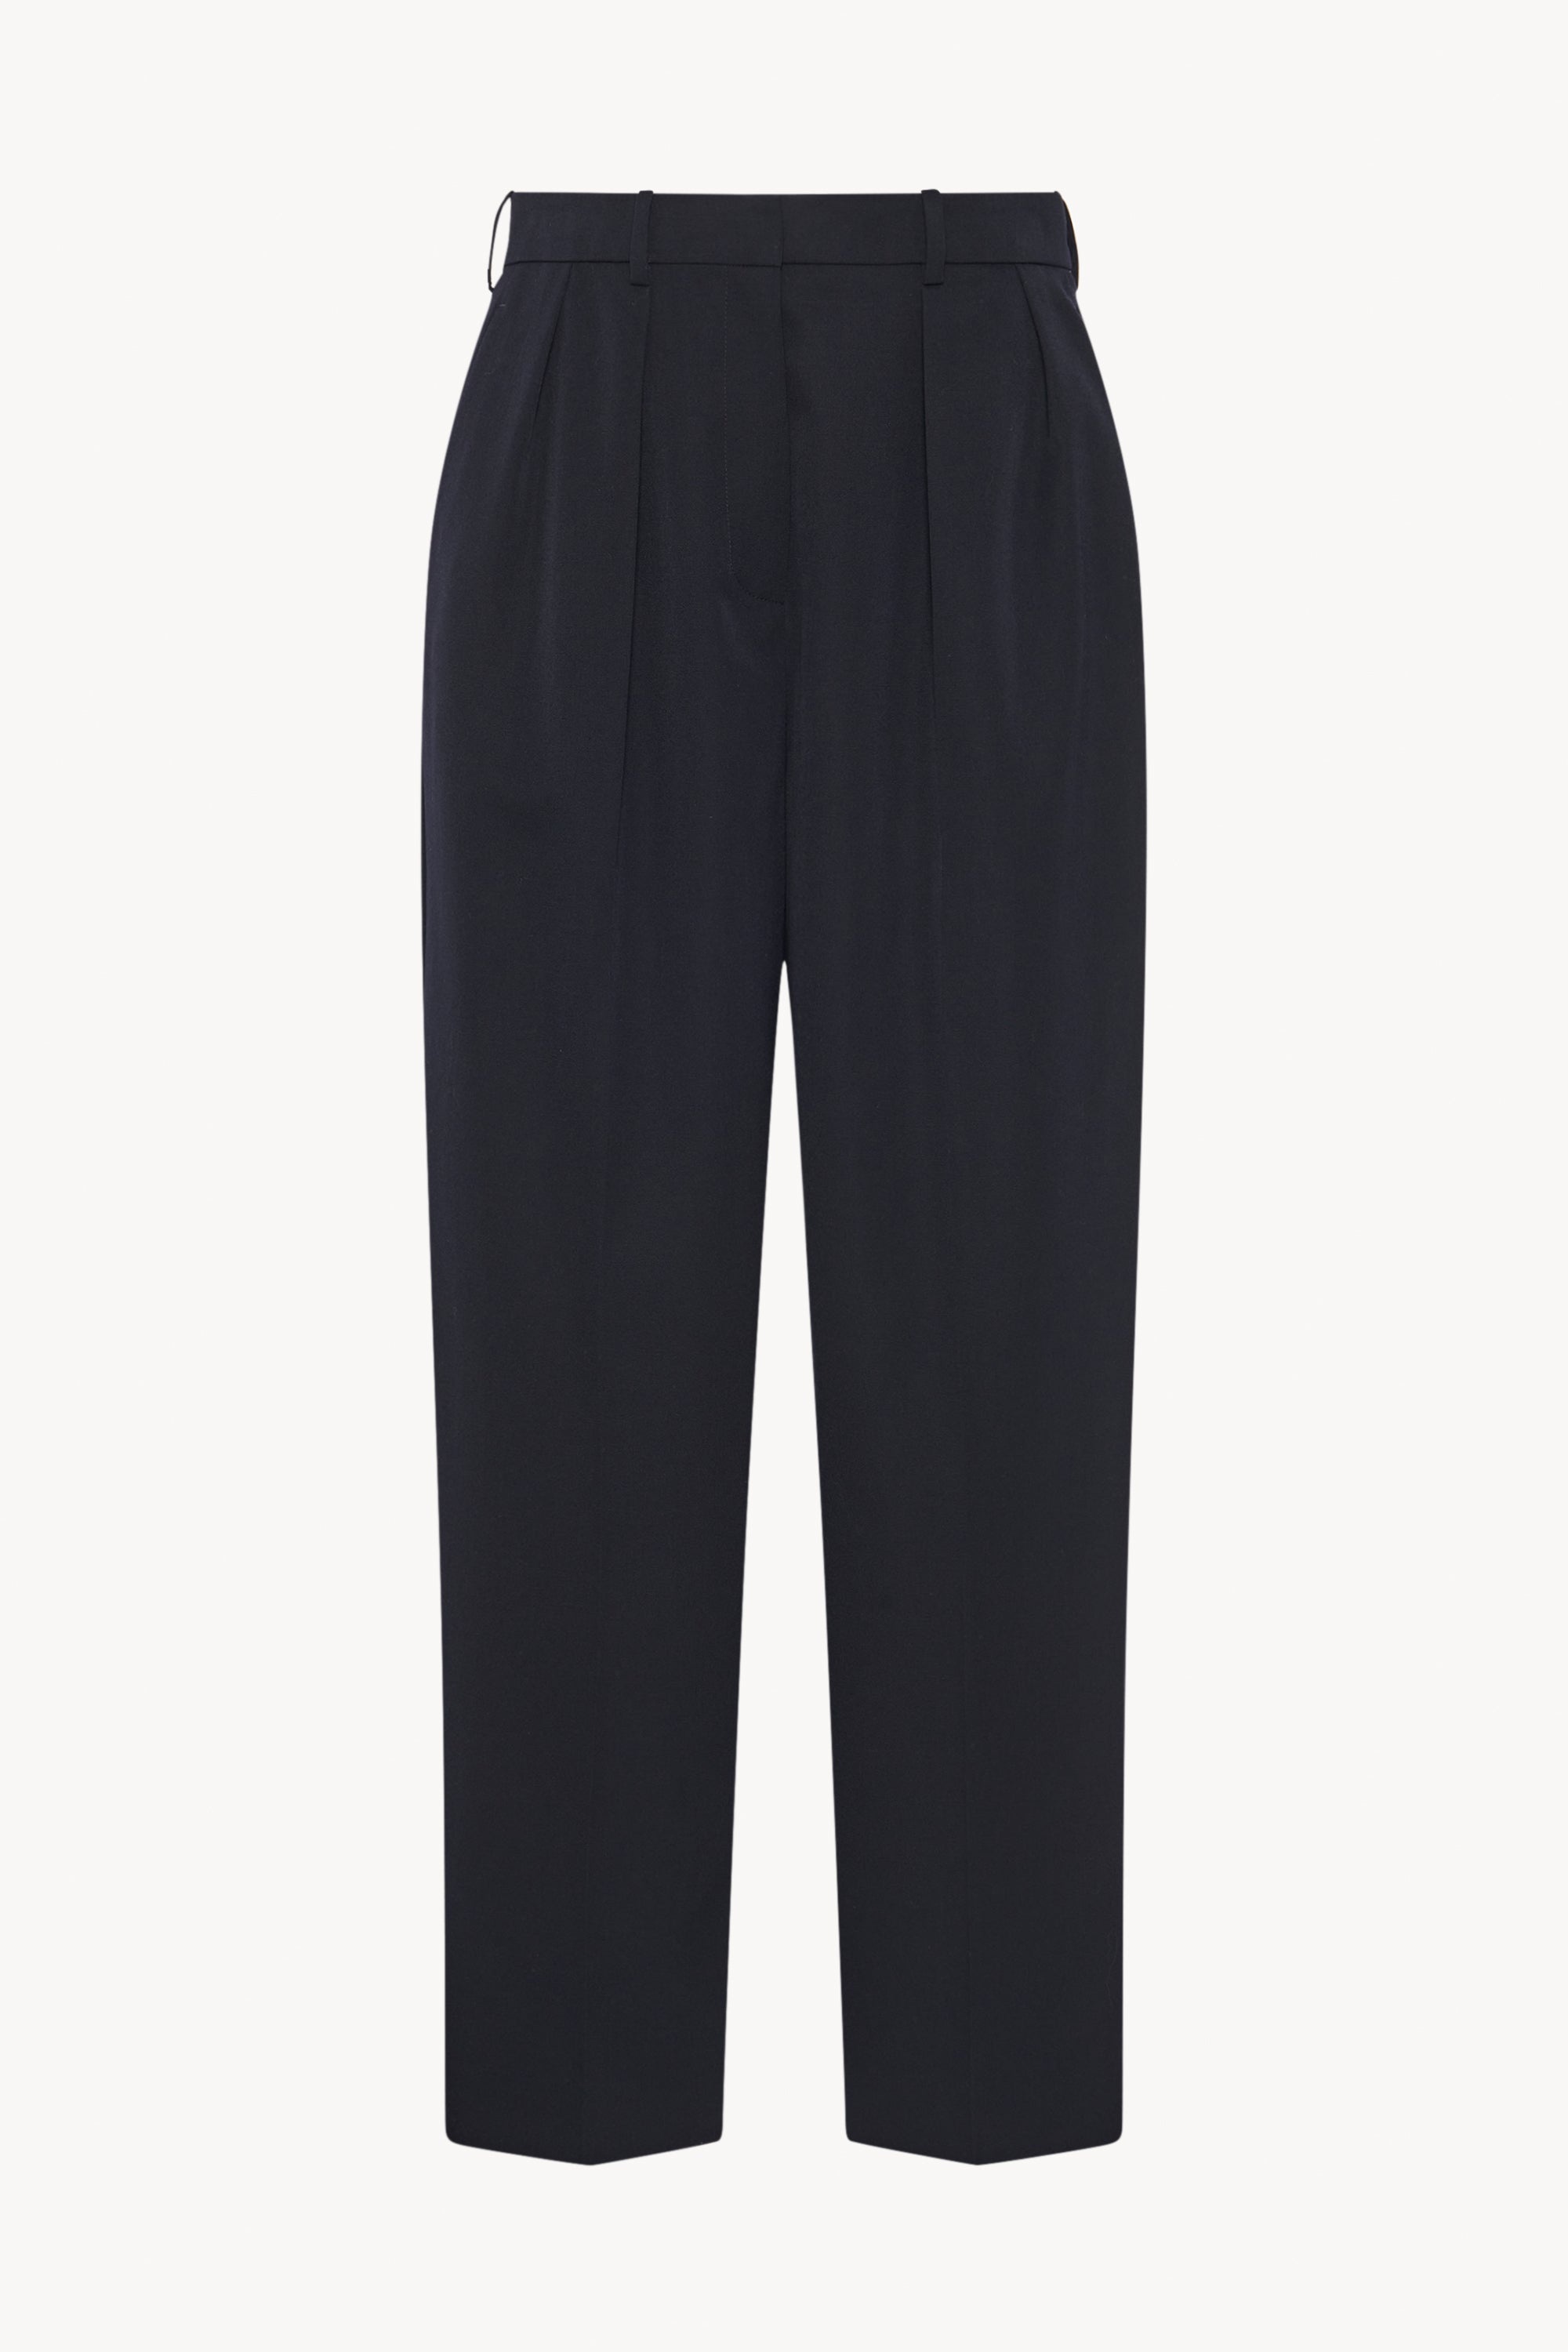 Corby Pant in Wool - 1